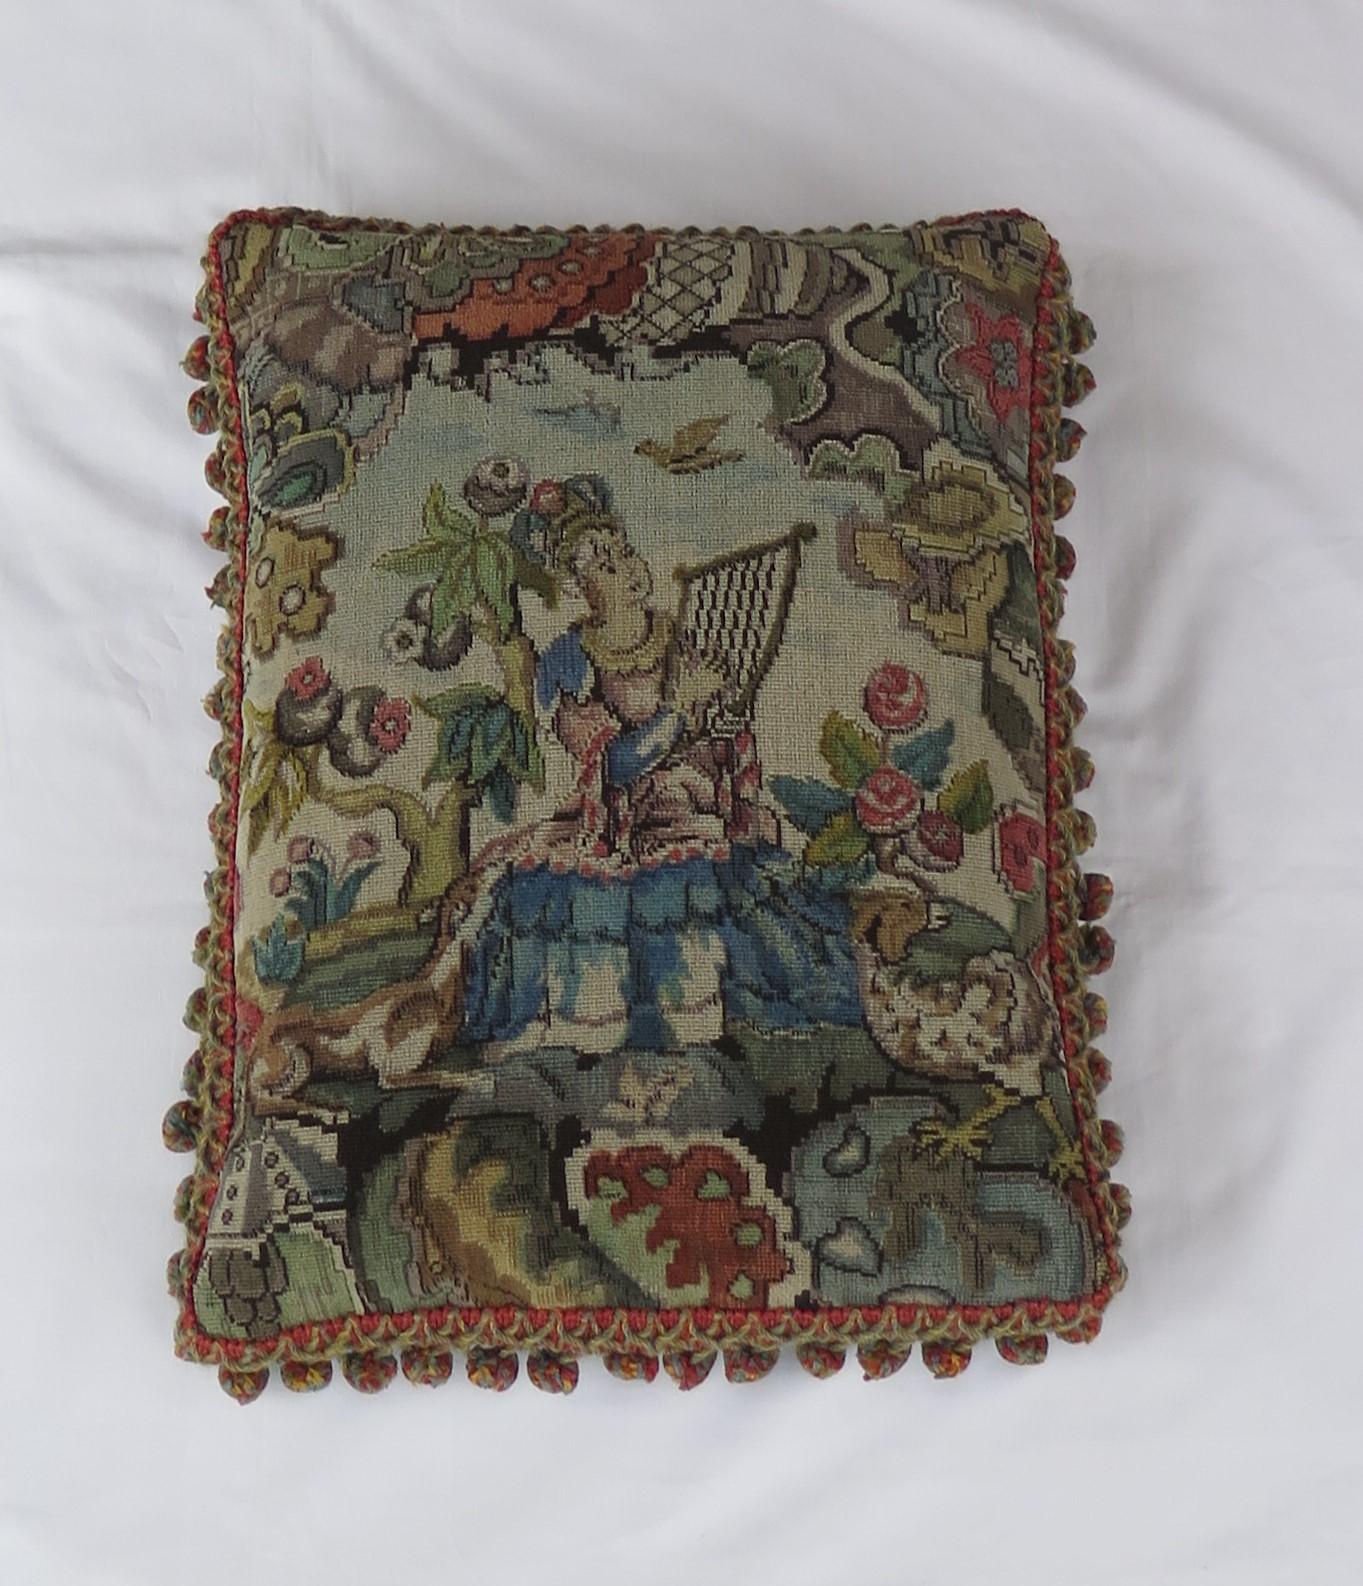 Hand-Crafted Woven Tapestry Cushion or Pillow in Aubusson style, French, 19th Century